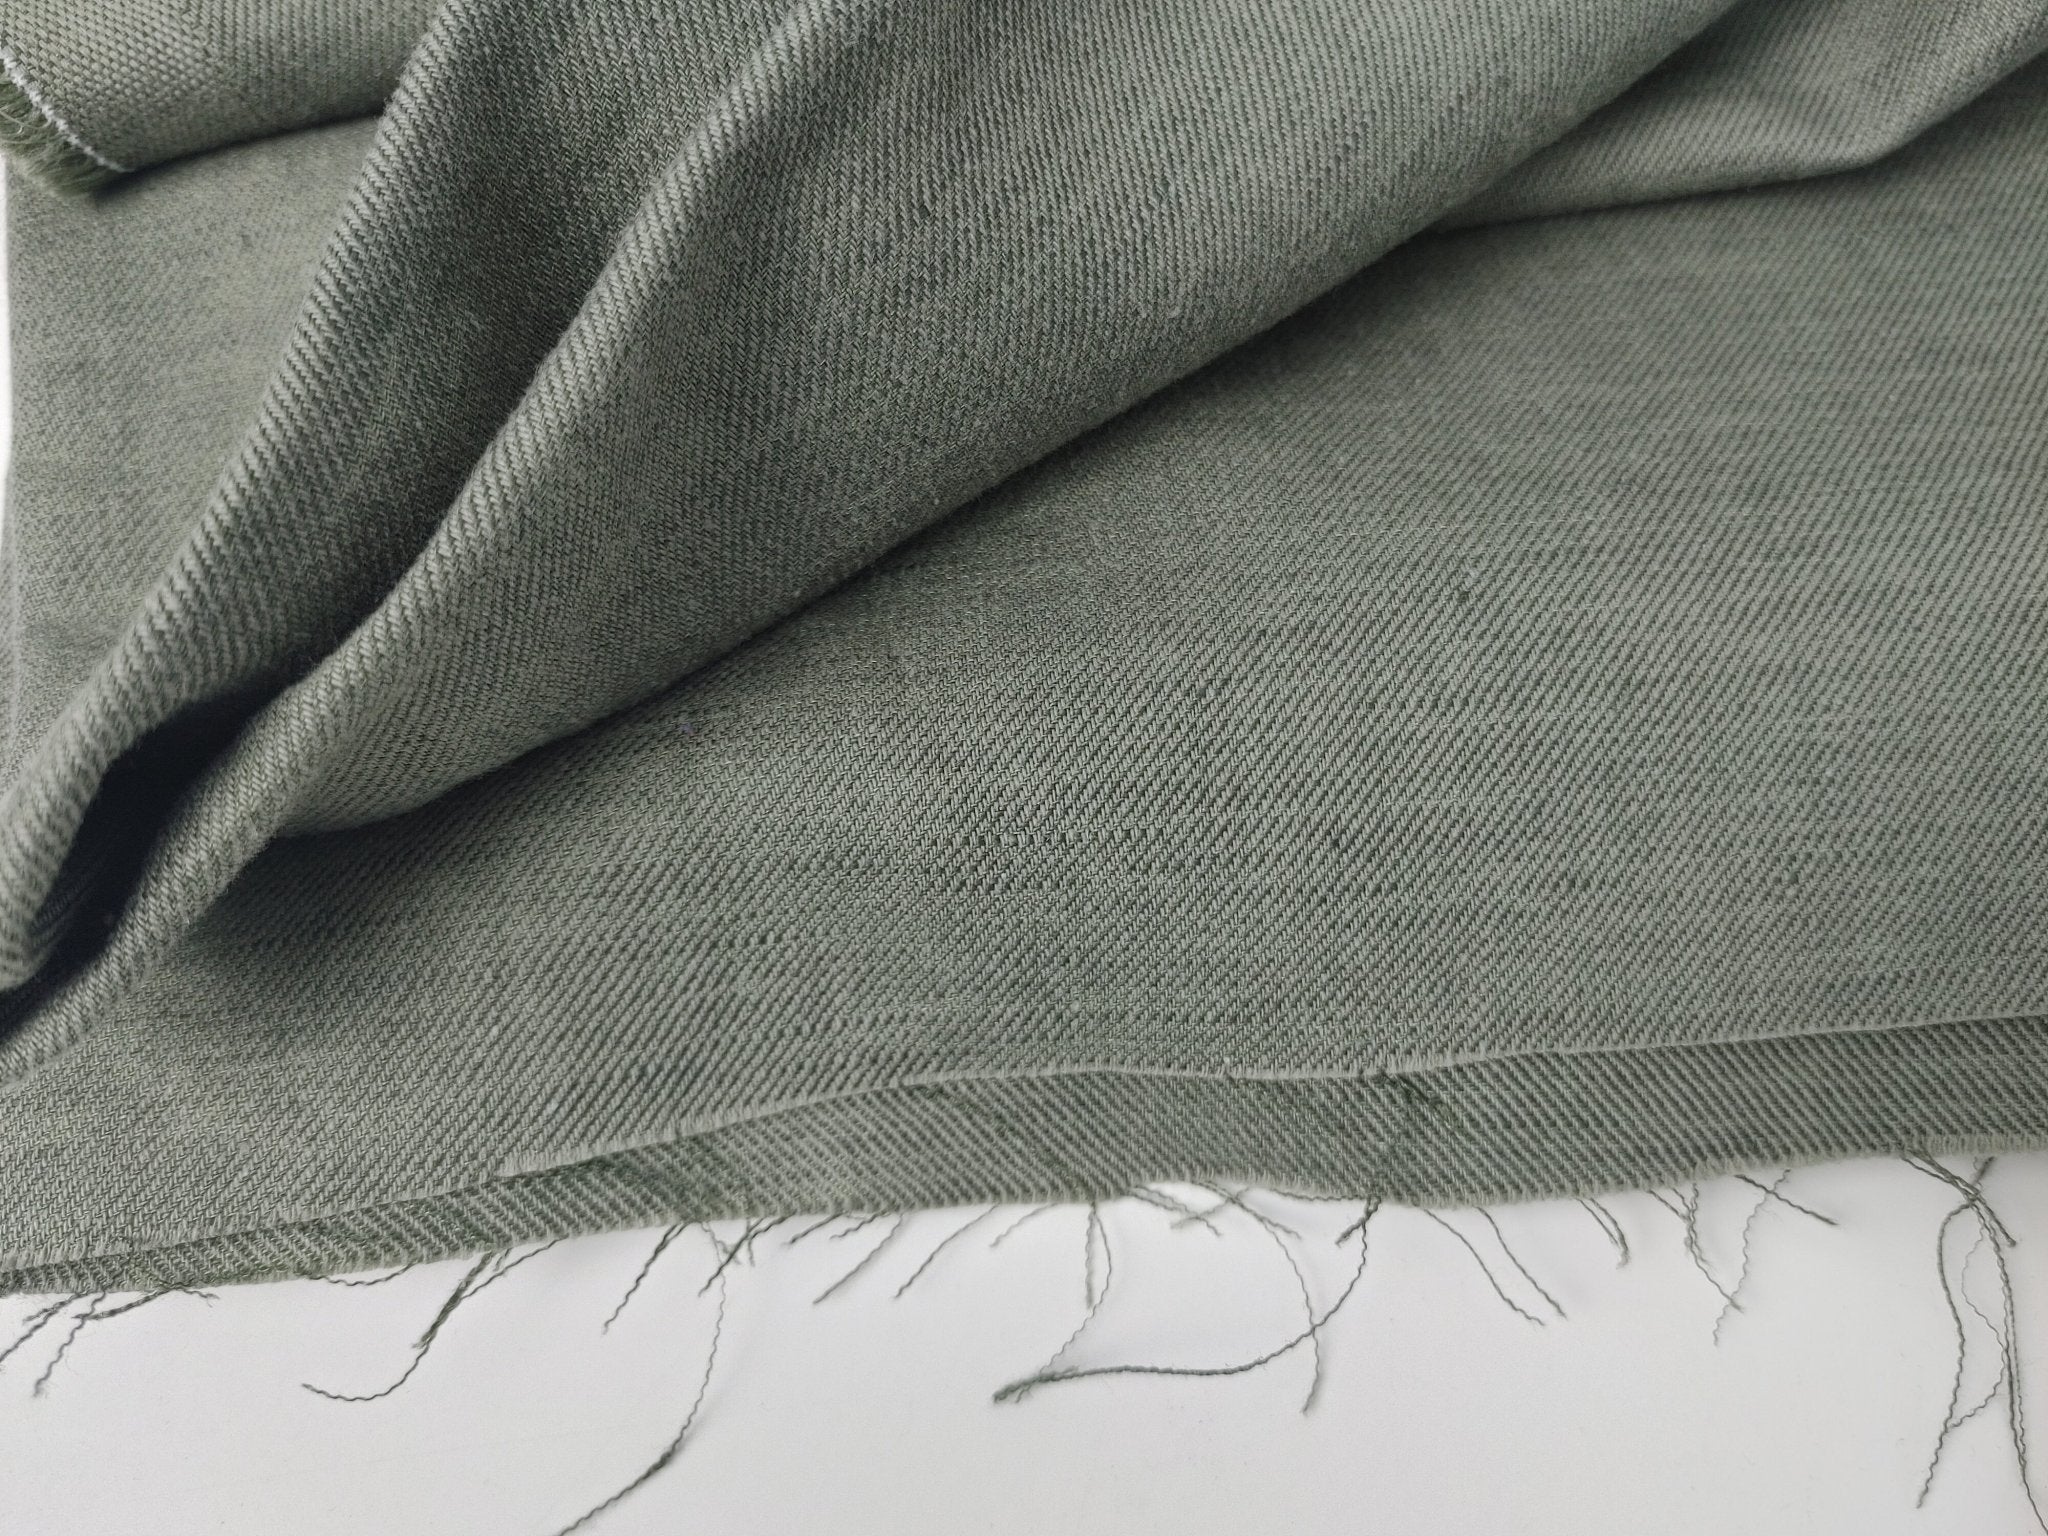 Linen Cotton Twill Chambray Fabric 3420 4960 7622 2979 4957 4959 4958 7544 - The Linen Lab - Green